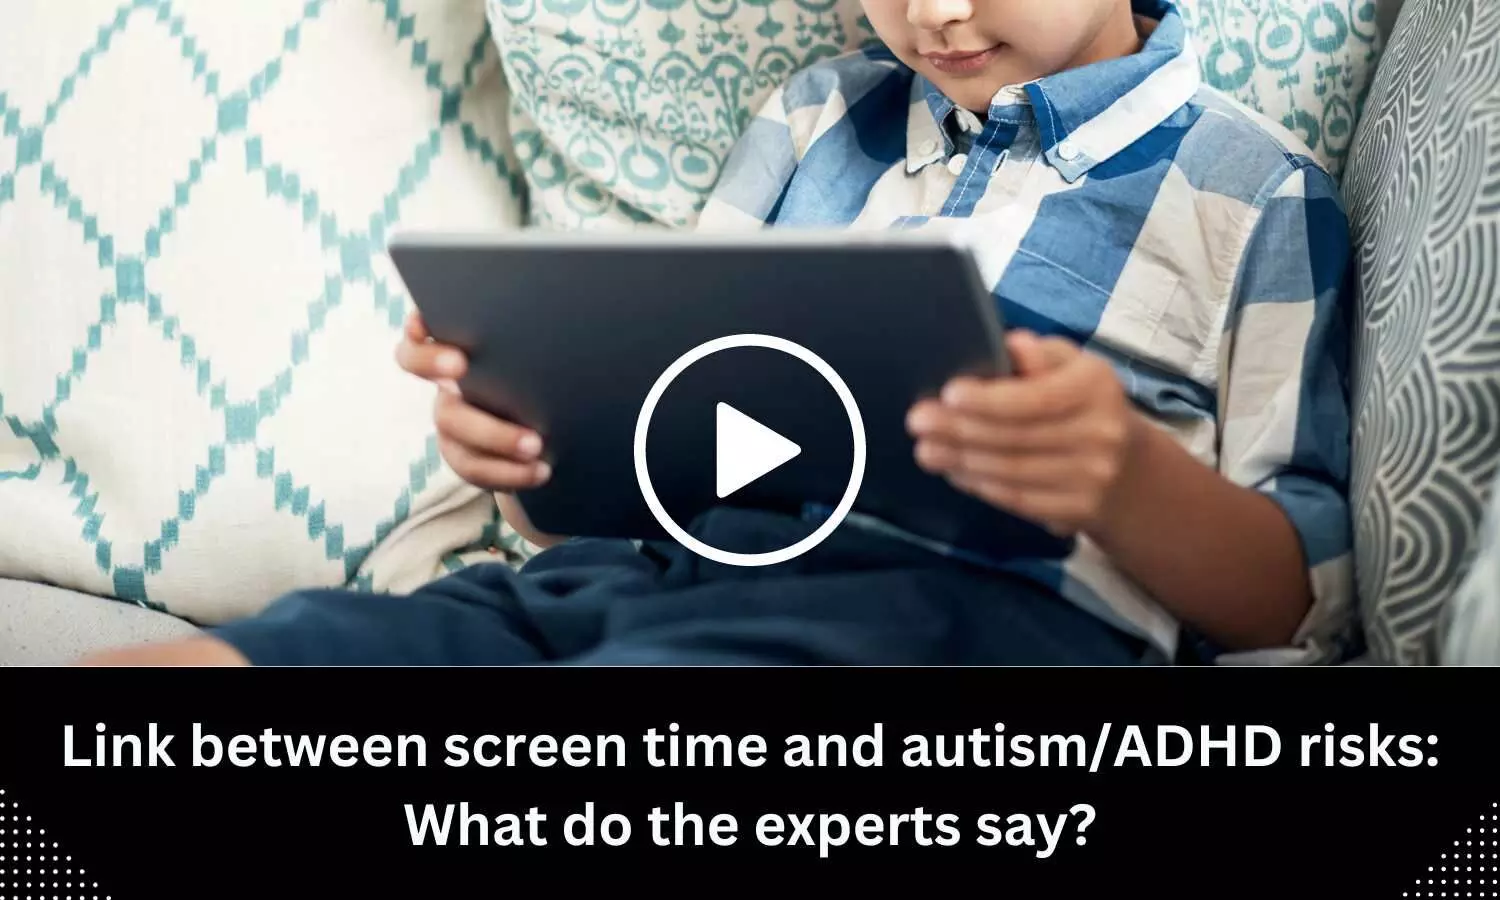 Link between screen time and autism/ADHD risks: What do the experts say?